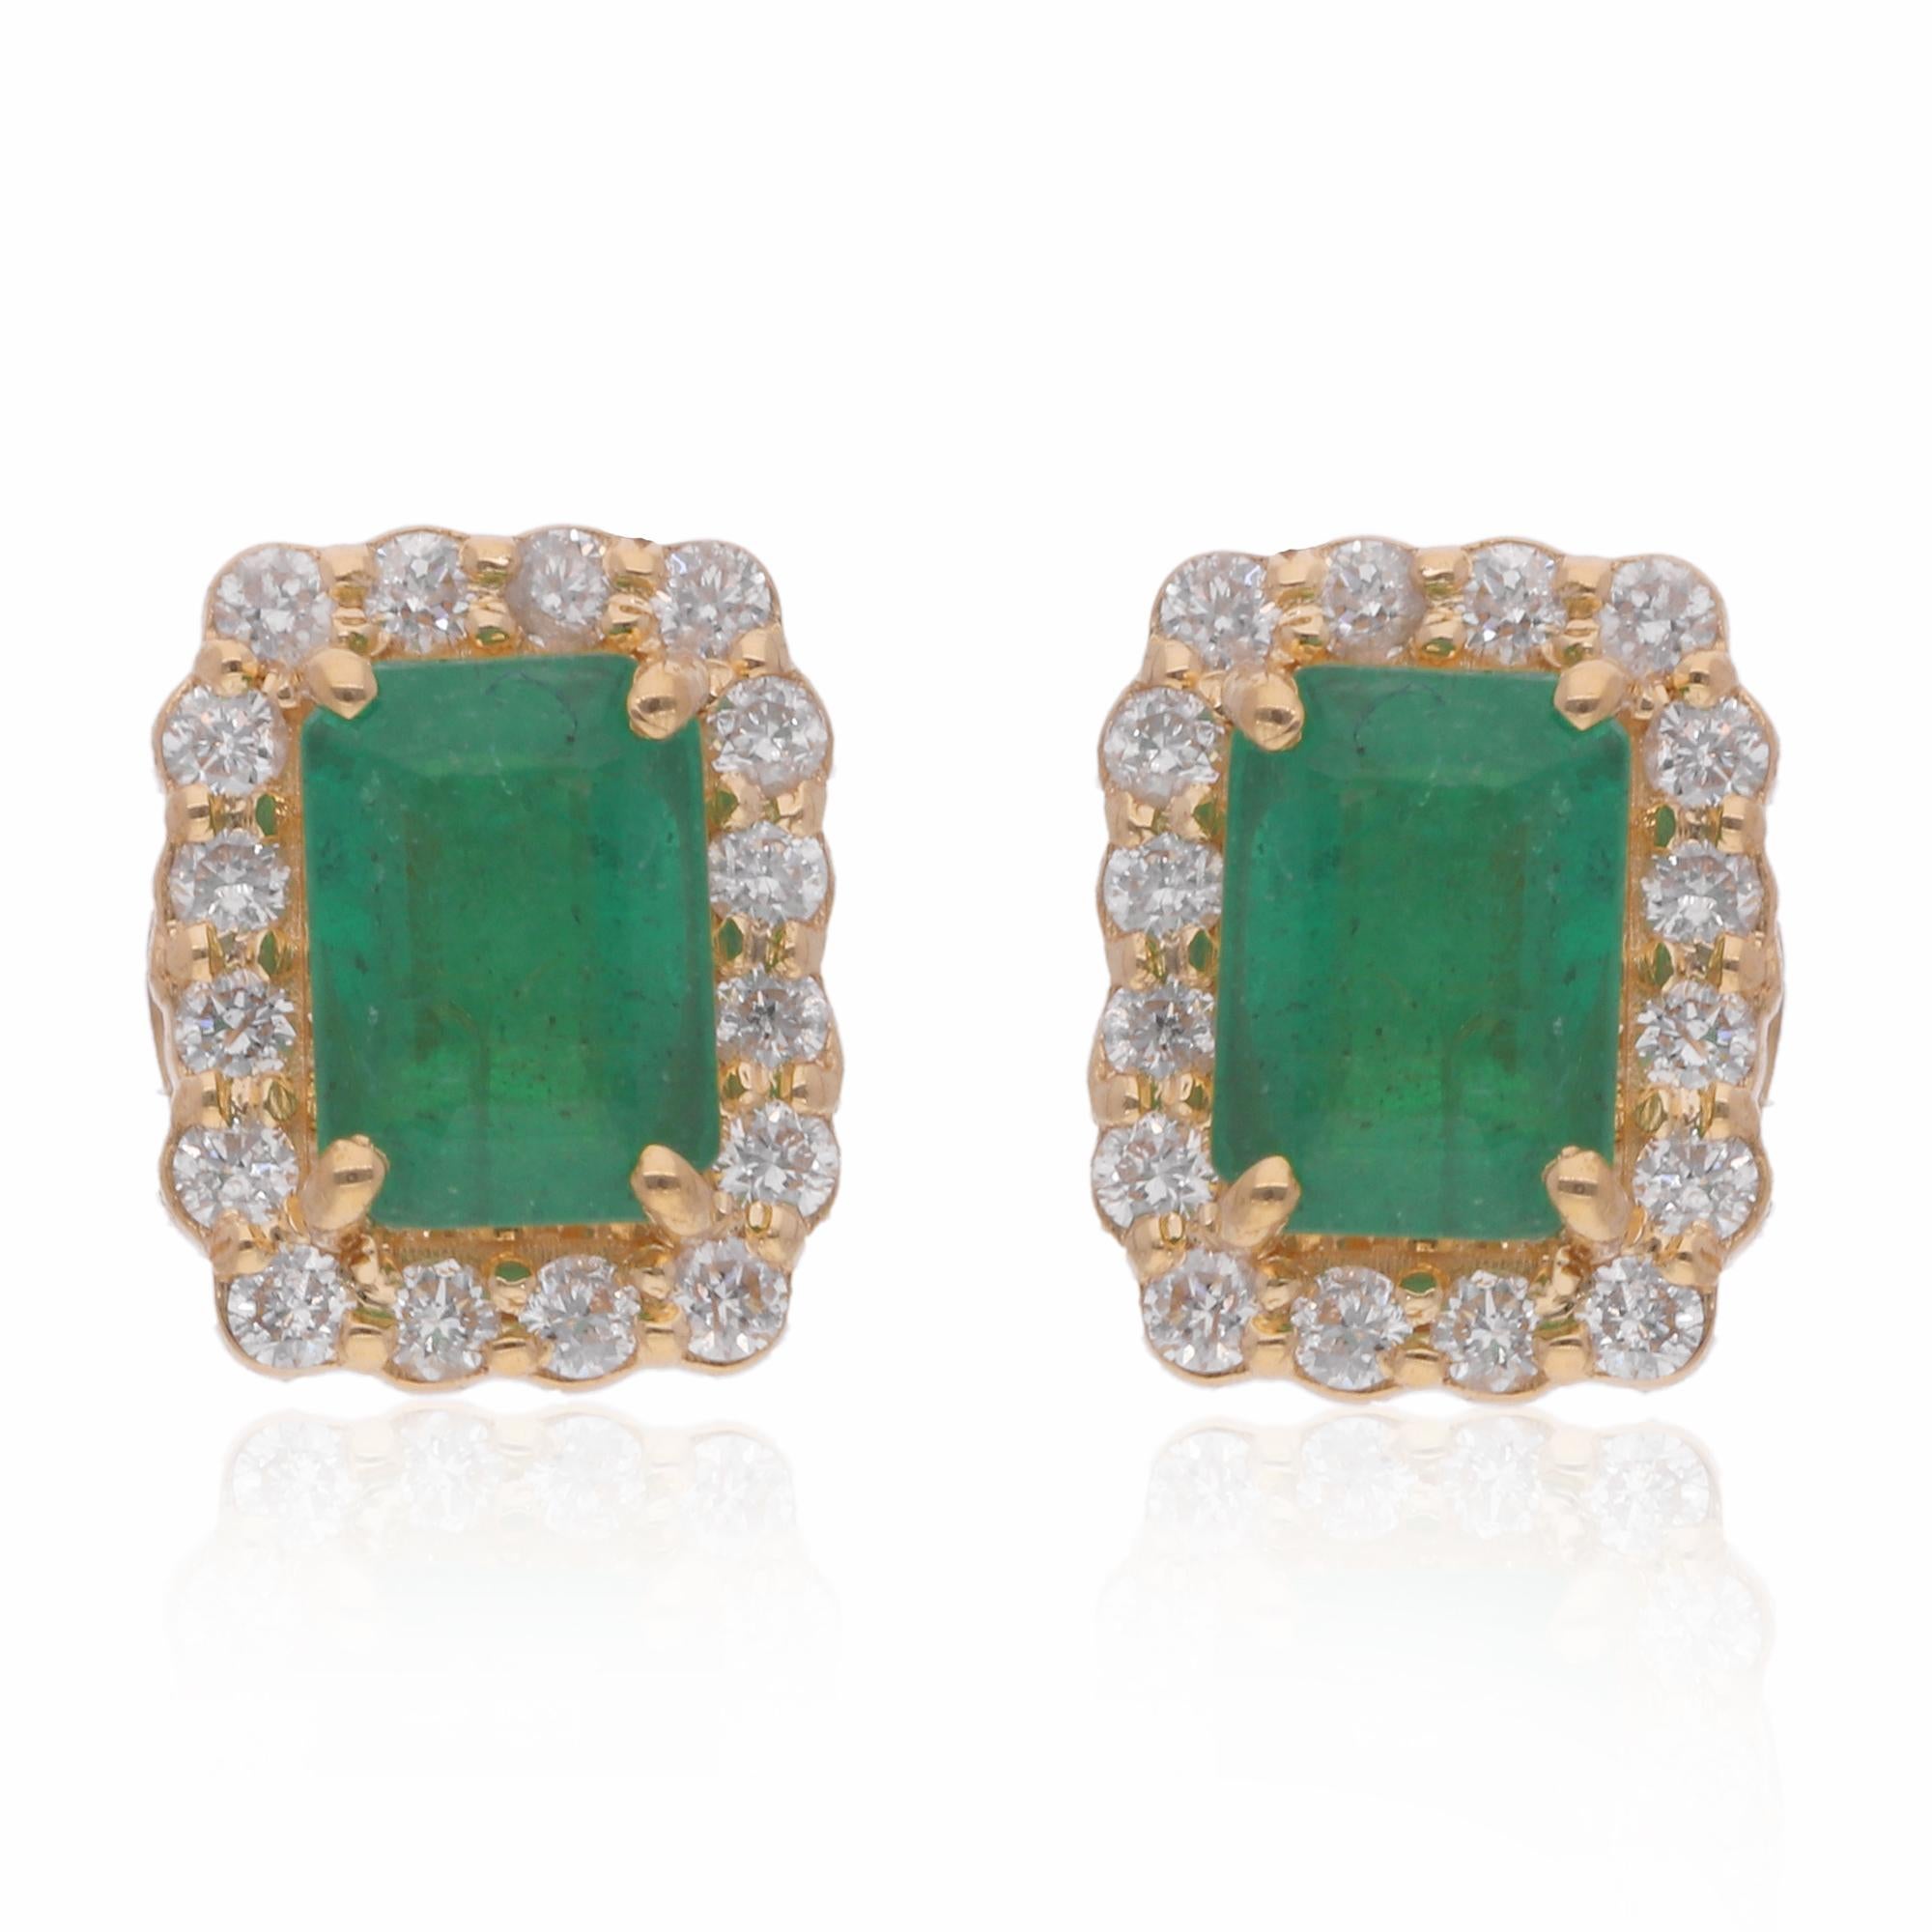 Adorn yourself with the timeless elegance of these Real Zambian Emerald Gemstone Stud Earrings, accented by dazzling Diamonds and set in luxurious 14 Karat White Gold. These exquisite earrings are a celebration of sophistication and natural beauty,